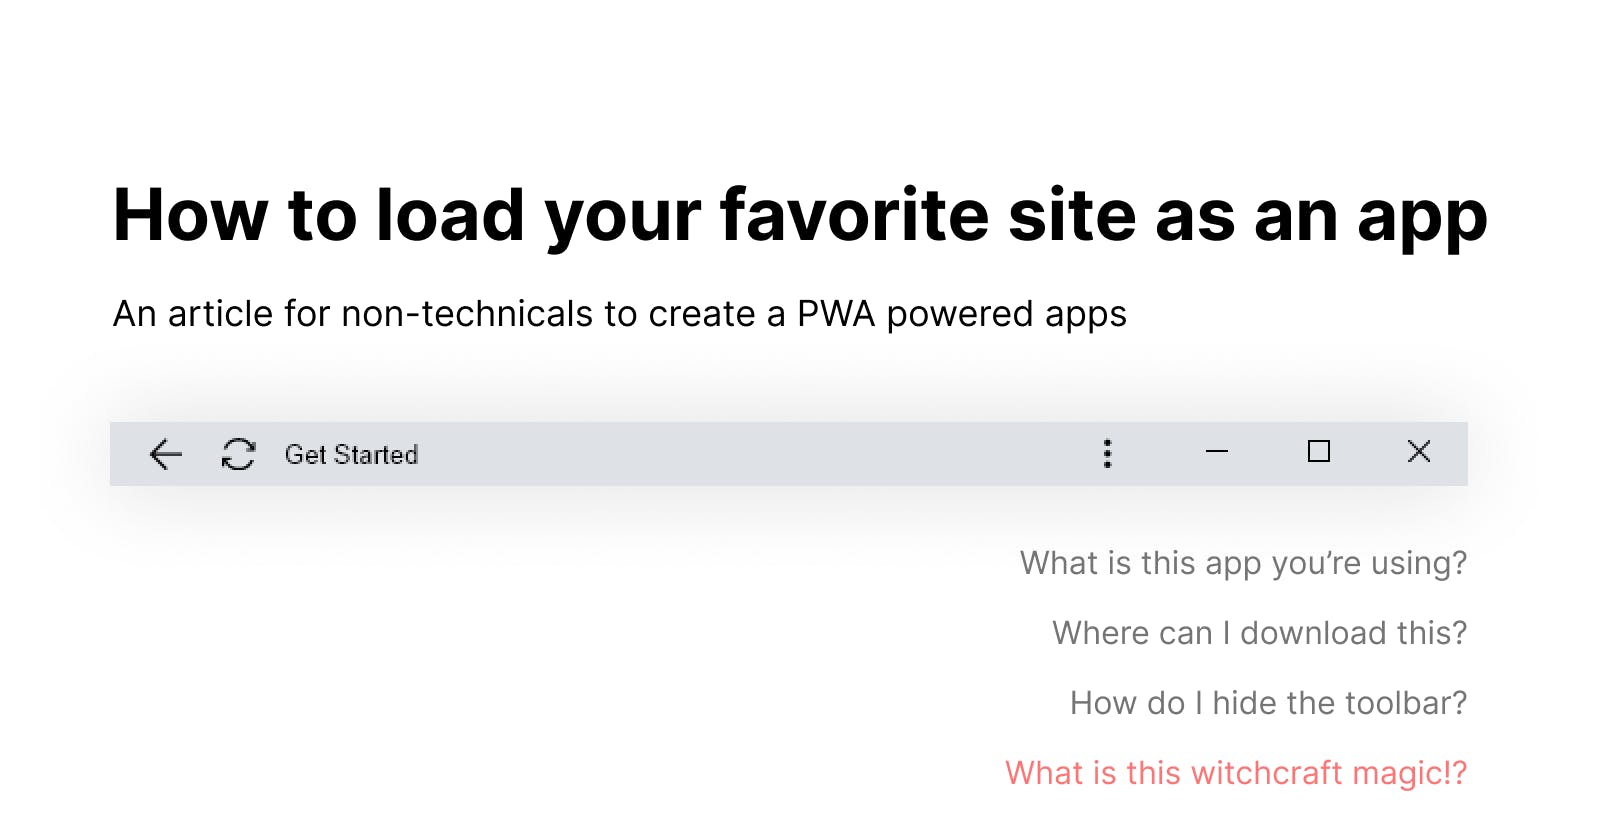 How to create an "app" for your favorite site in Chrome (PWA)